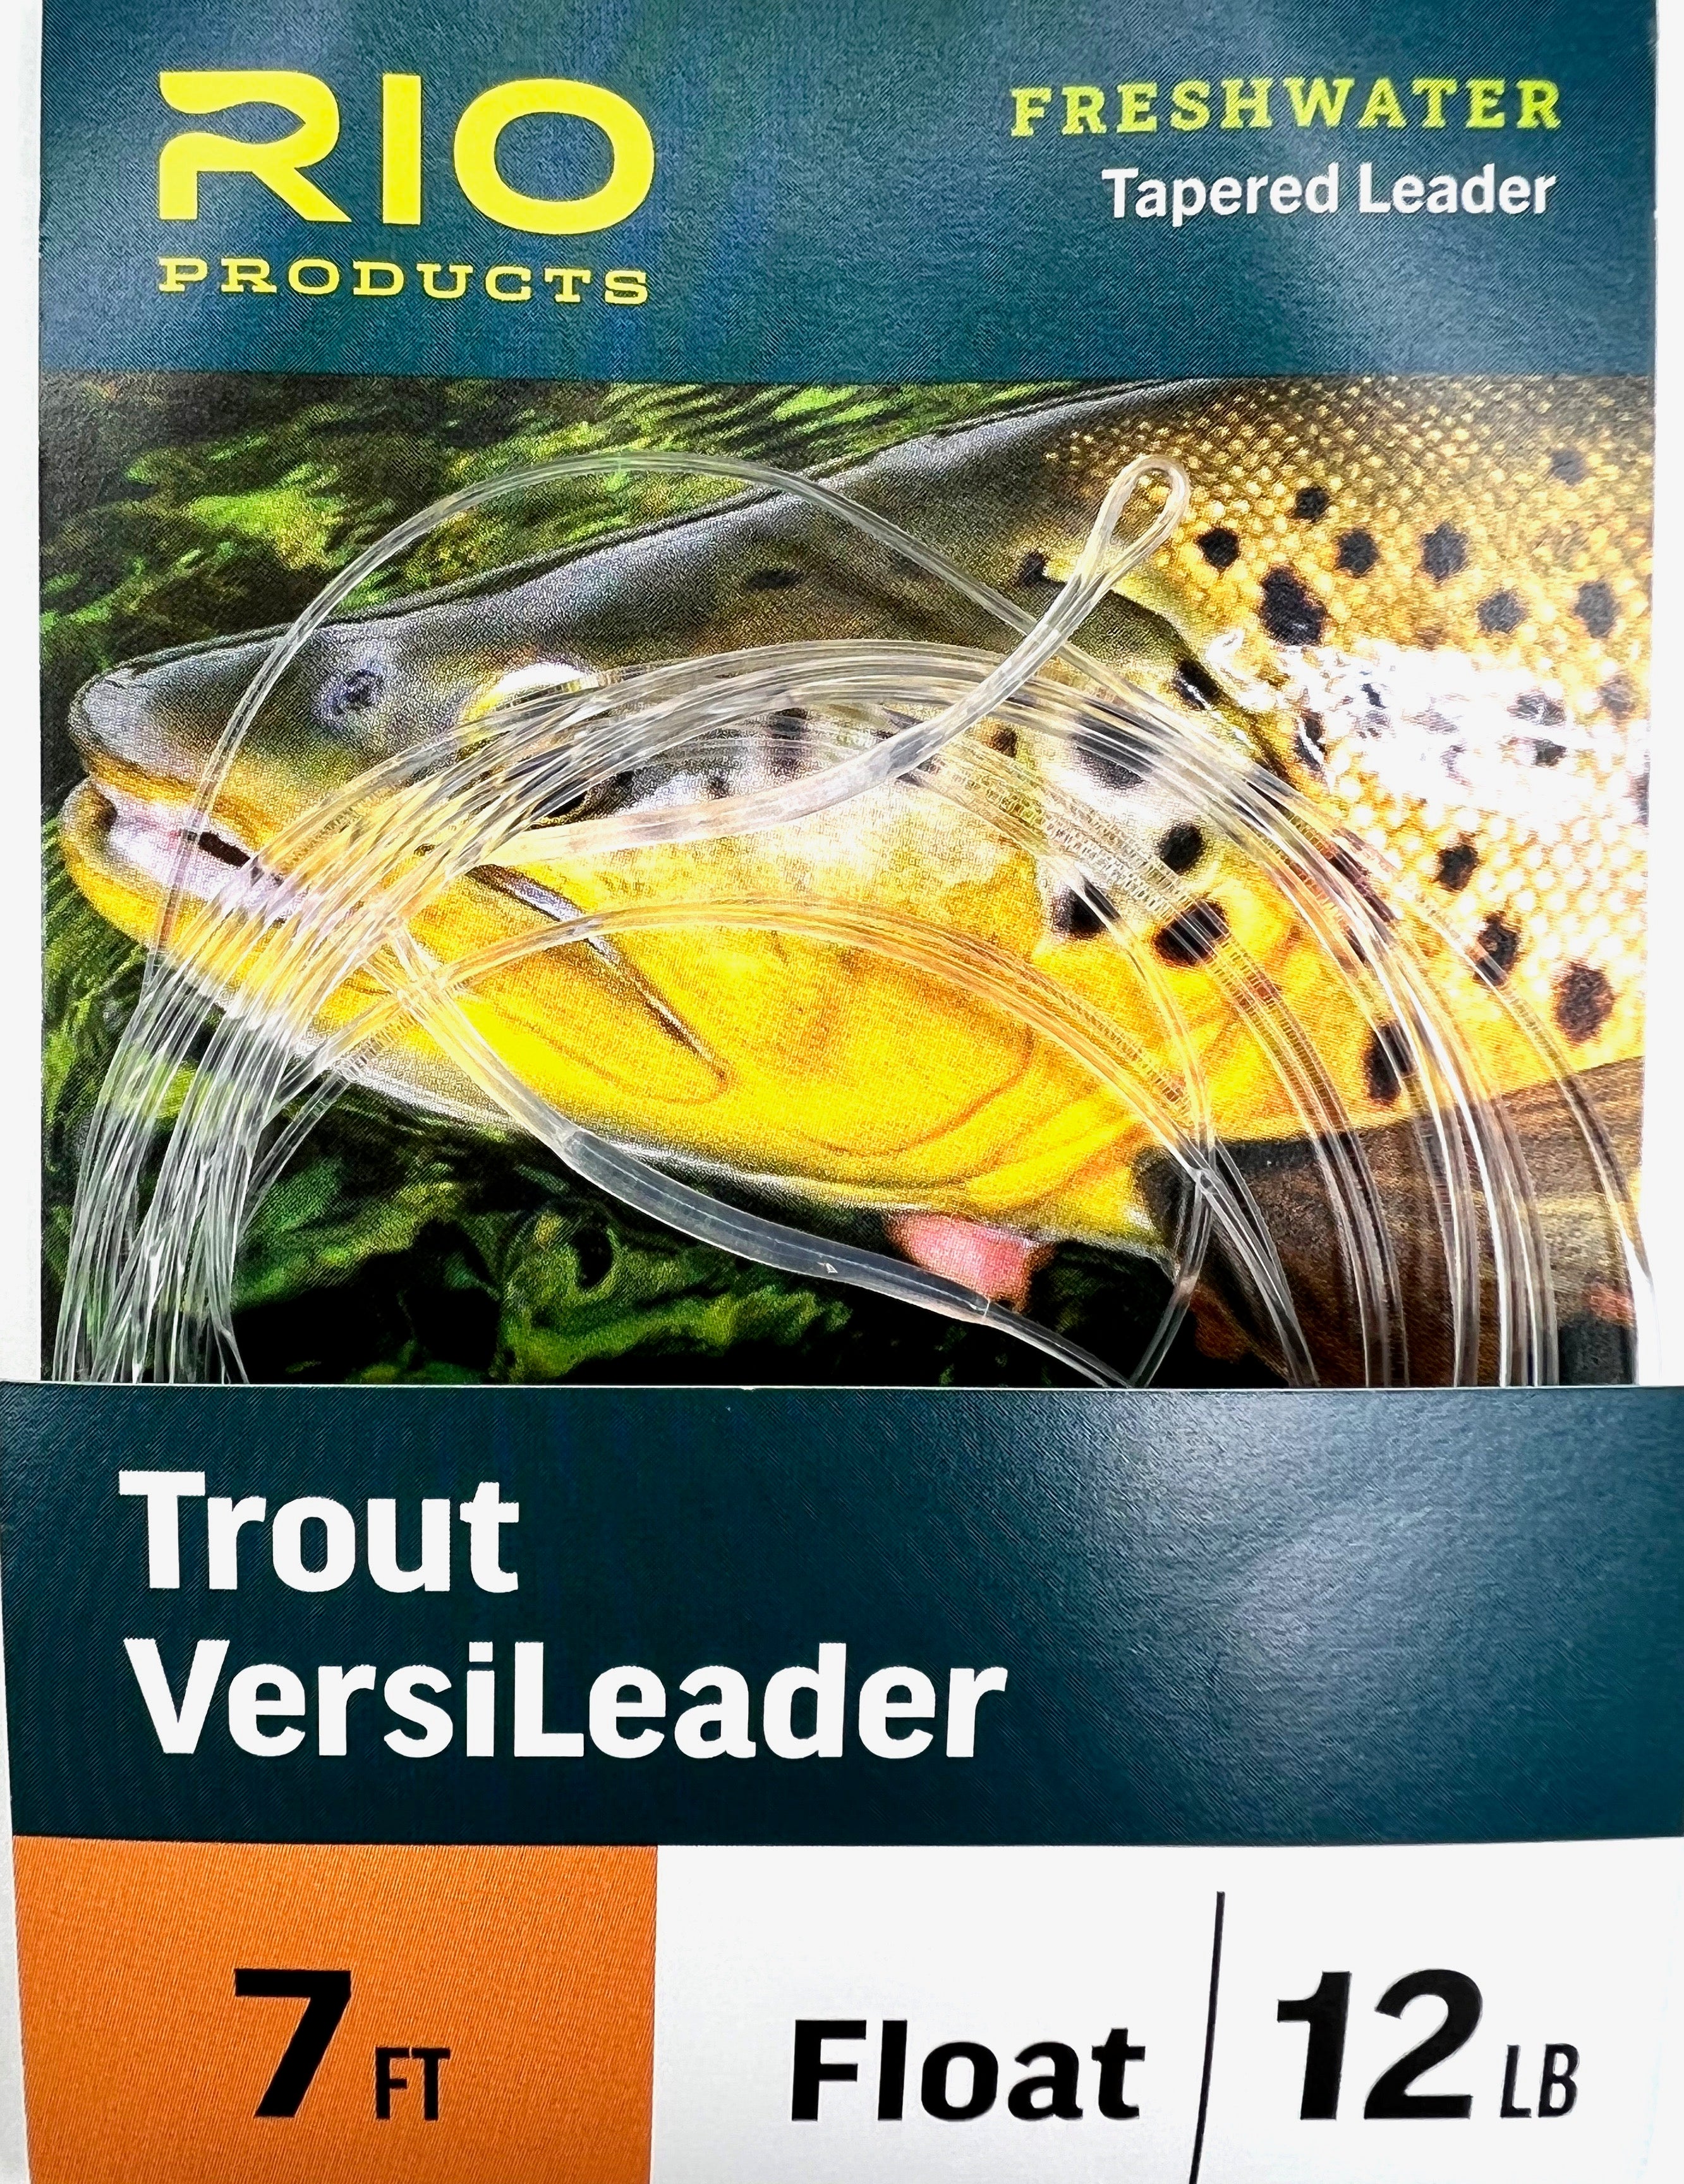 RIO Trout Versileader Fly Fishing Leader All Sinking Rates Up To 6 IPS 12lb  7ft